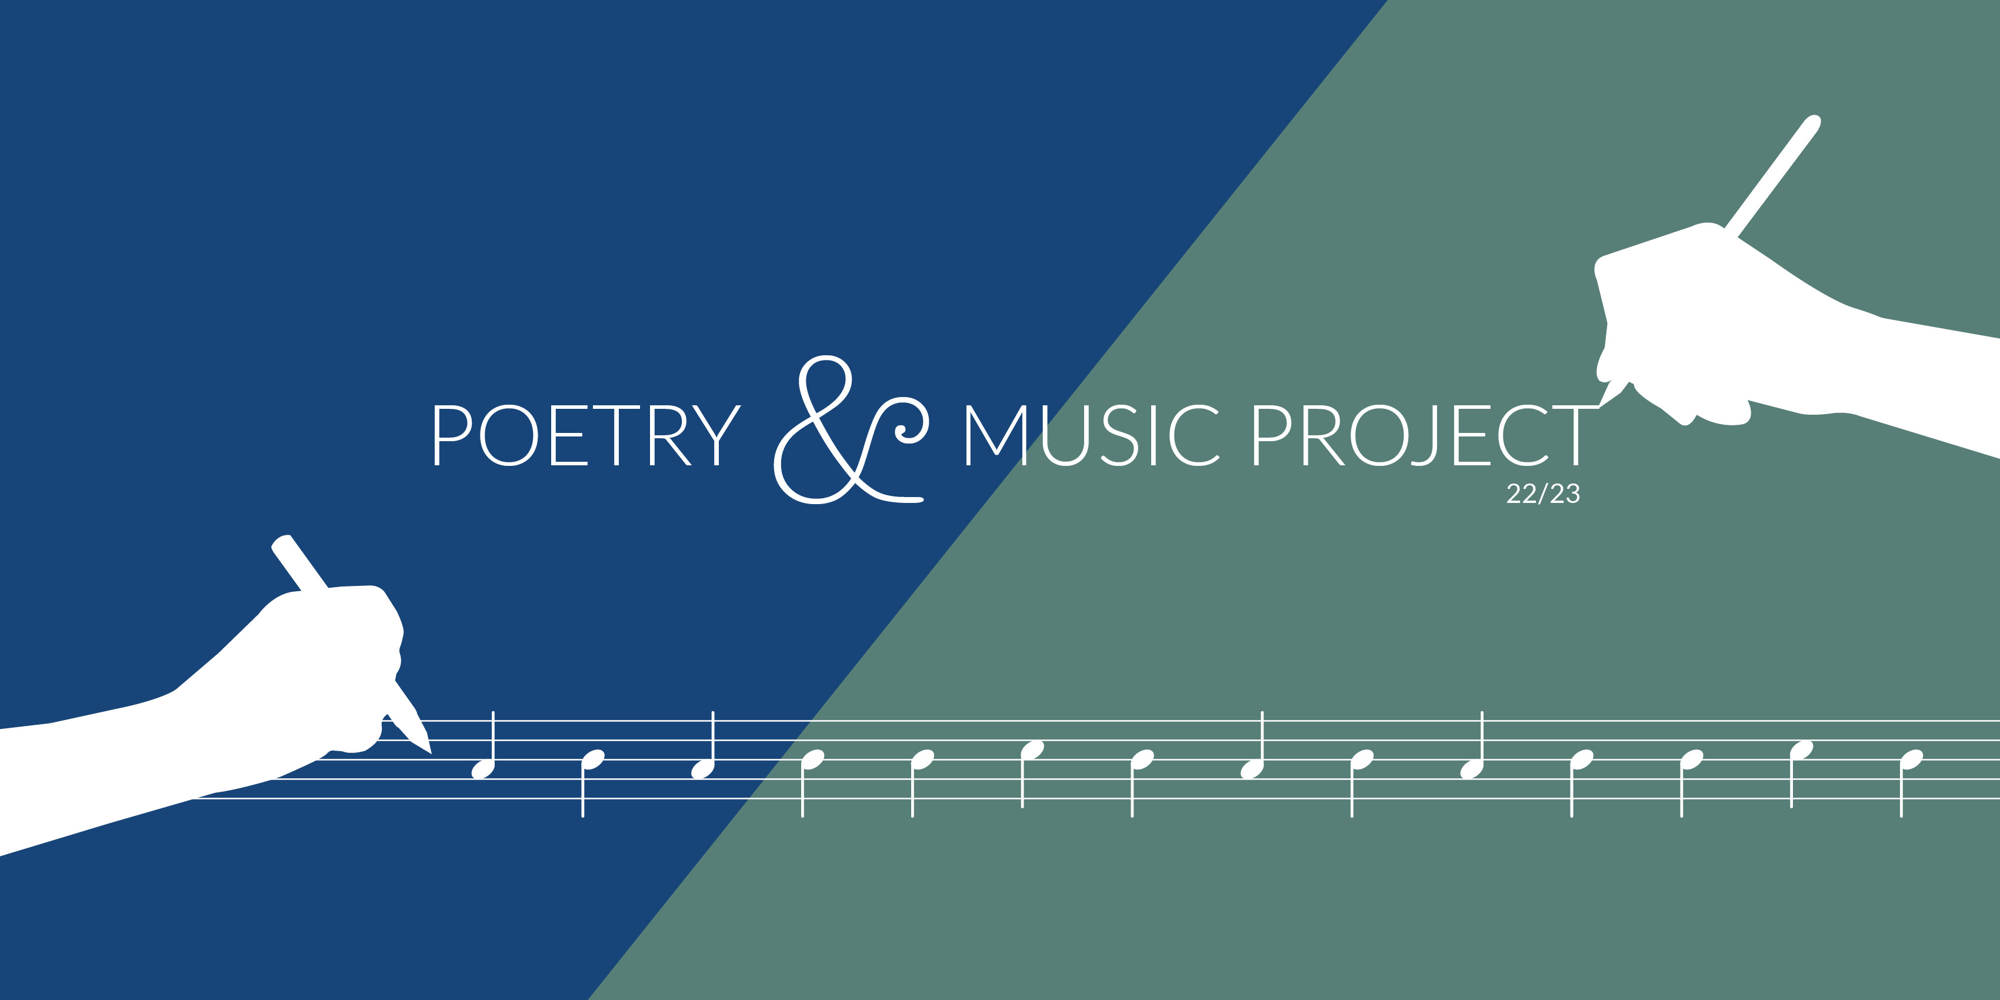 Poetry & Music Concert promotional image